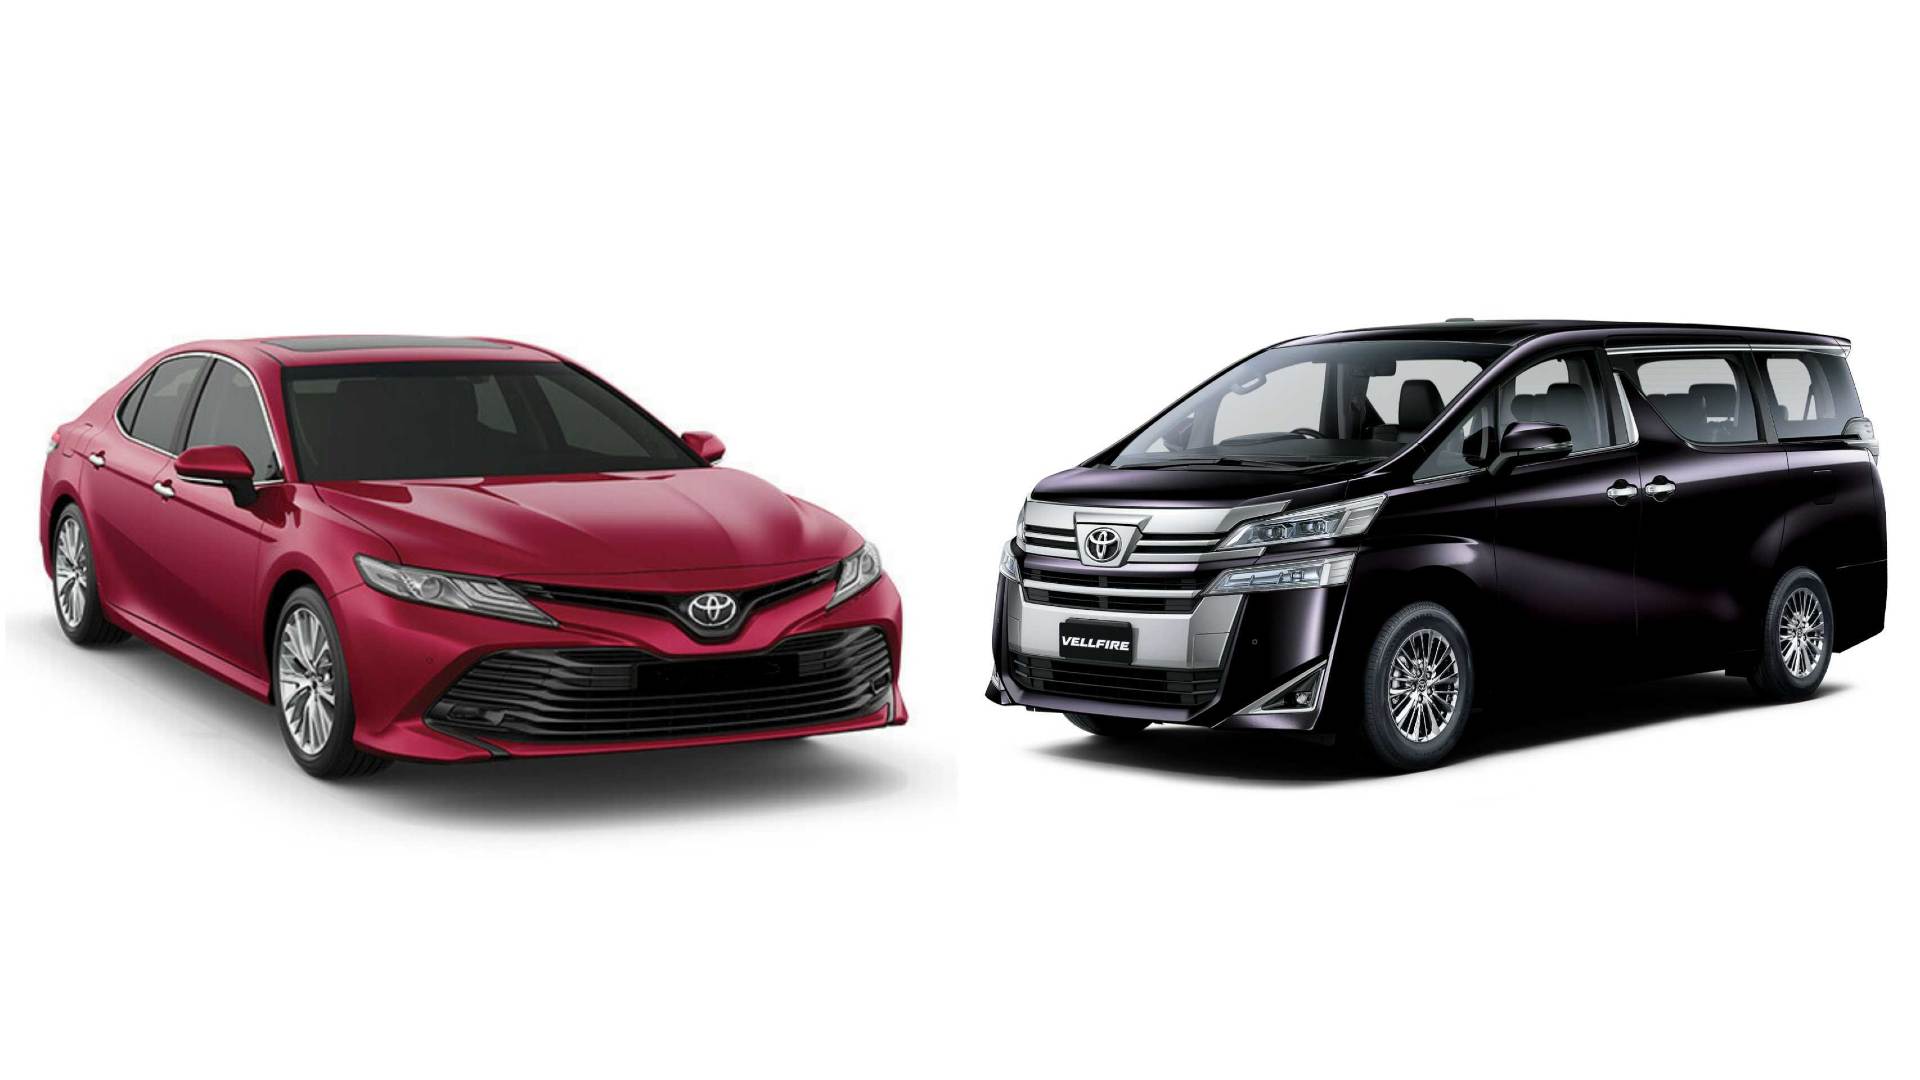 Both the Toyota Camry Hybrid and Vellfire MPV can run in pure-electric mode. Image: Toyota